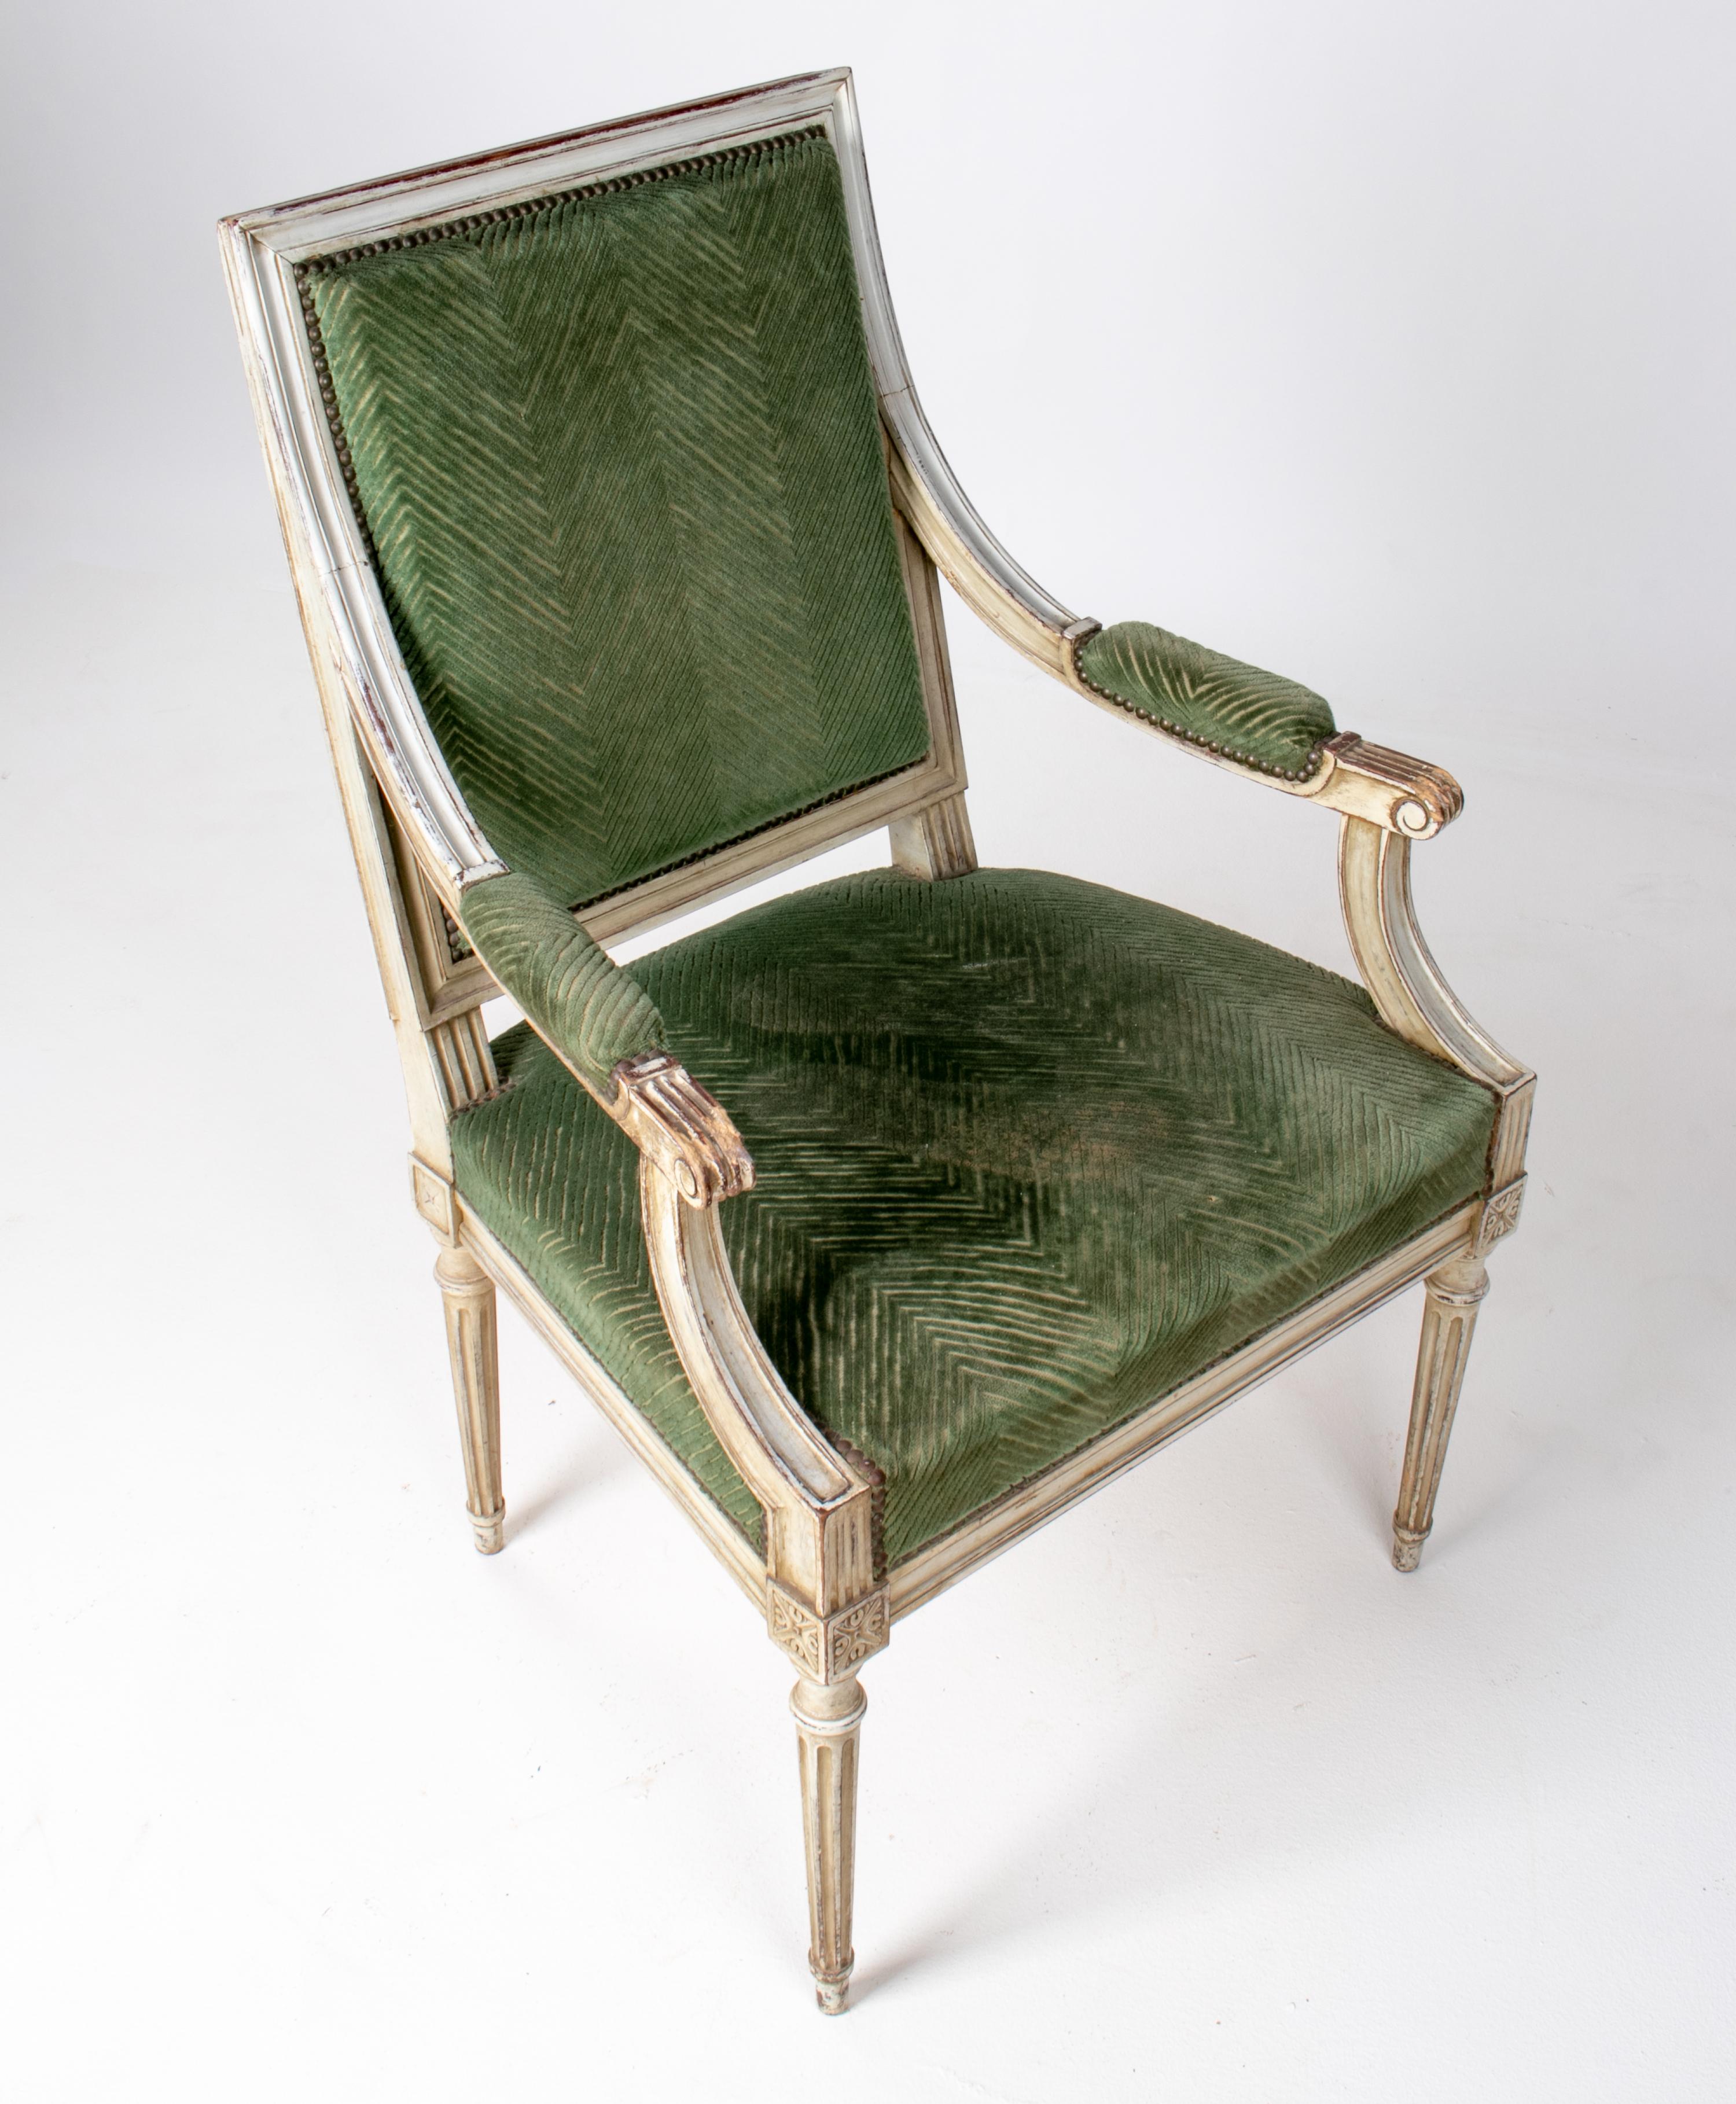 1870s French Louis XVI Style White Lacquered and Velvet Upholstered Armchair For Sale 3